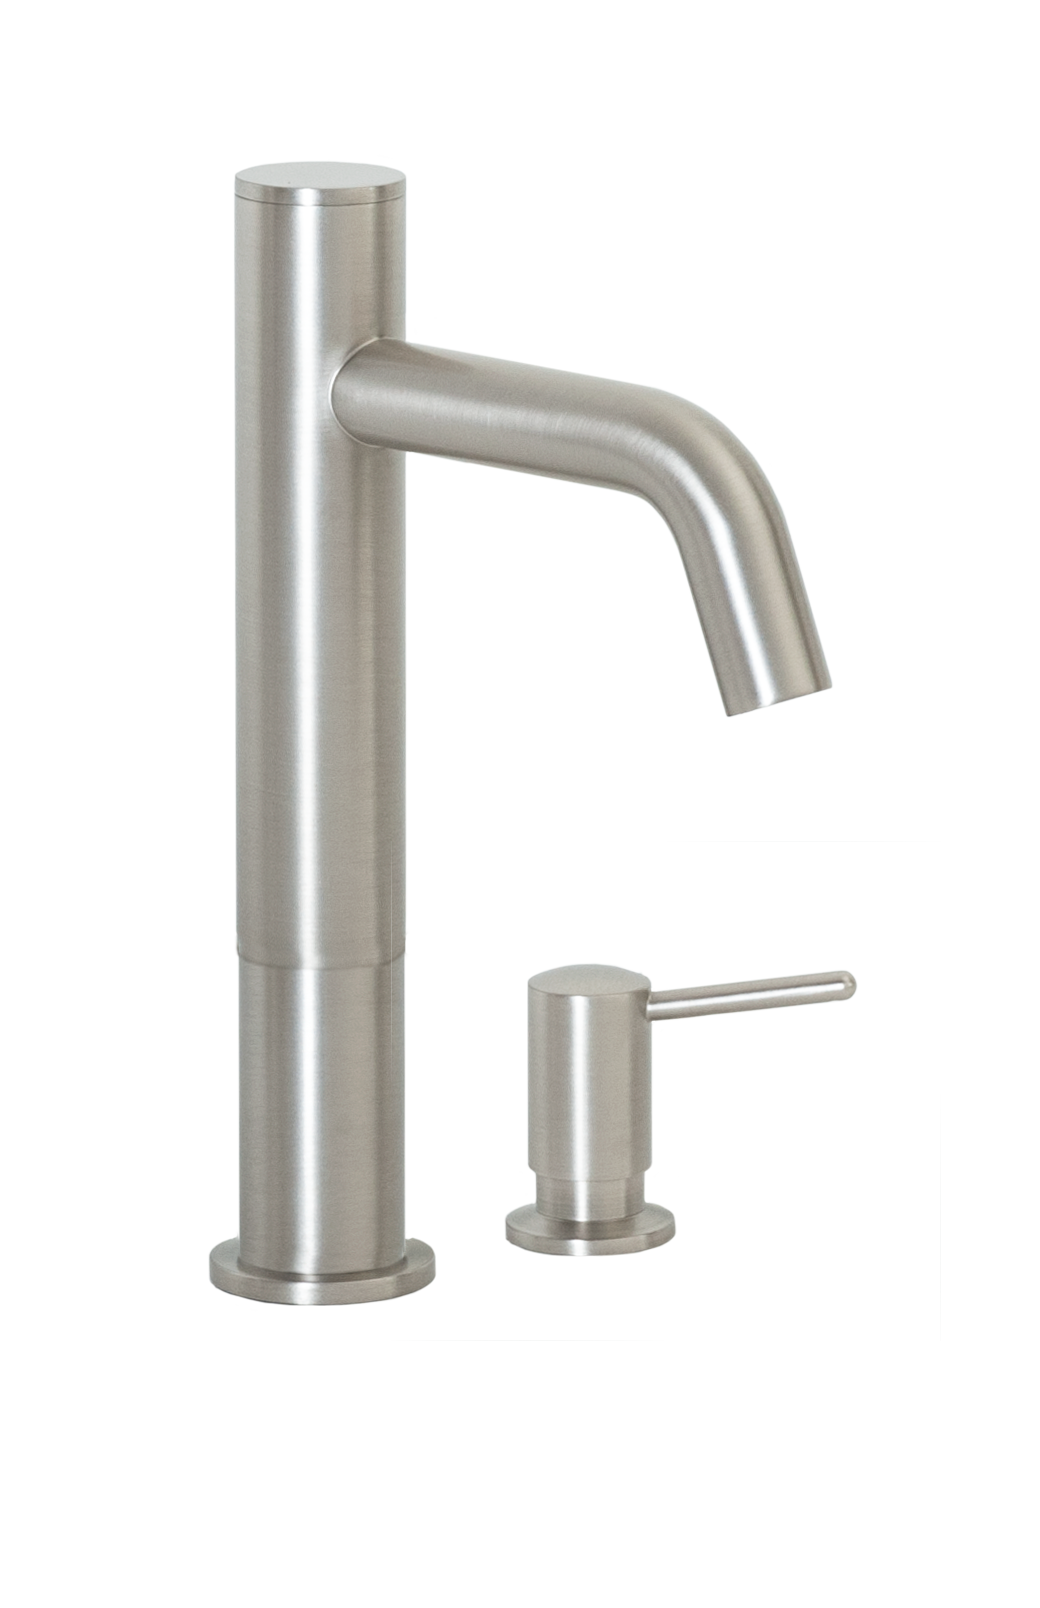 FA-3263S Automatic Faucet with 6” Spout Reach, 3” Riser and Manual Soap Dispenser In Satin Nickel